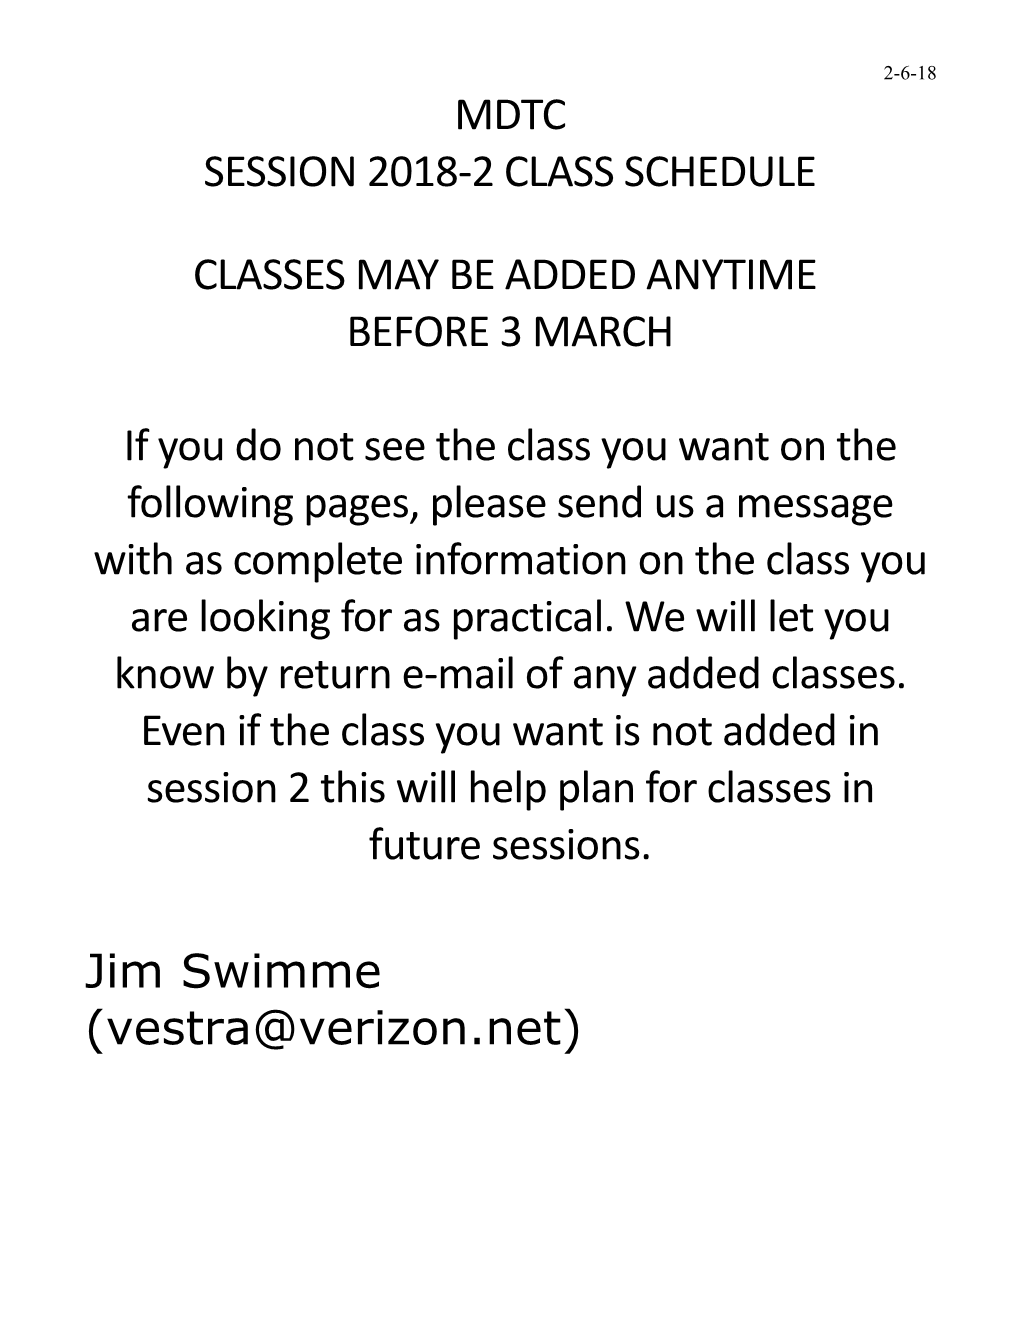 Session 2018-2 Class Schedule